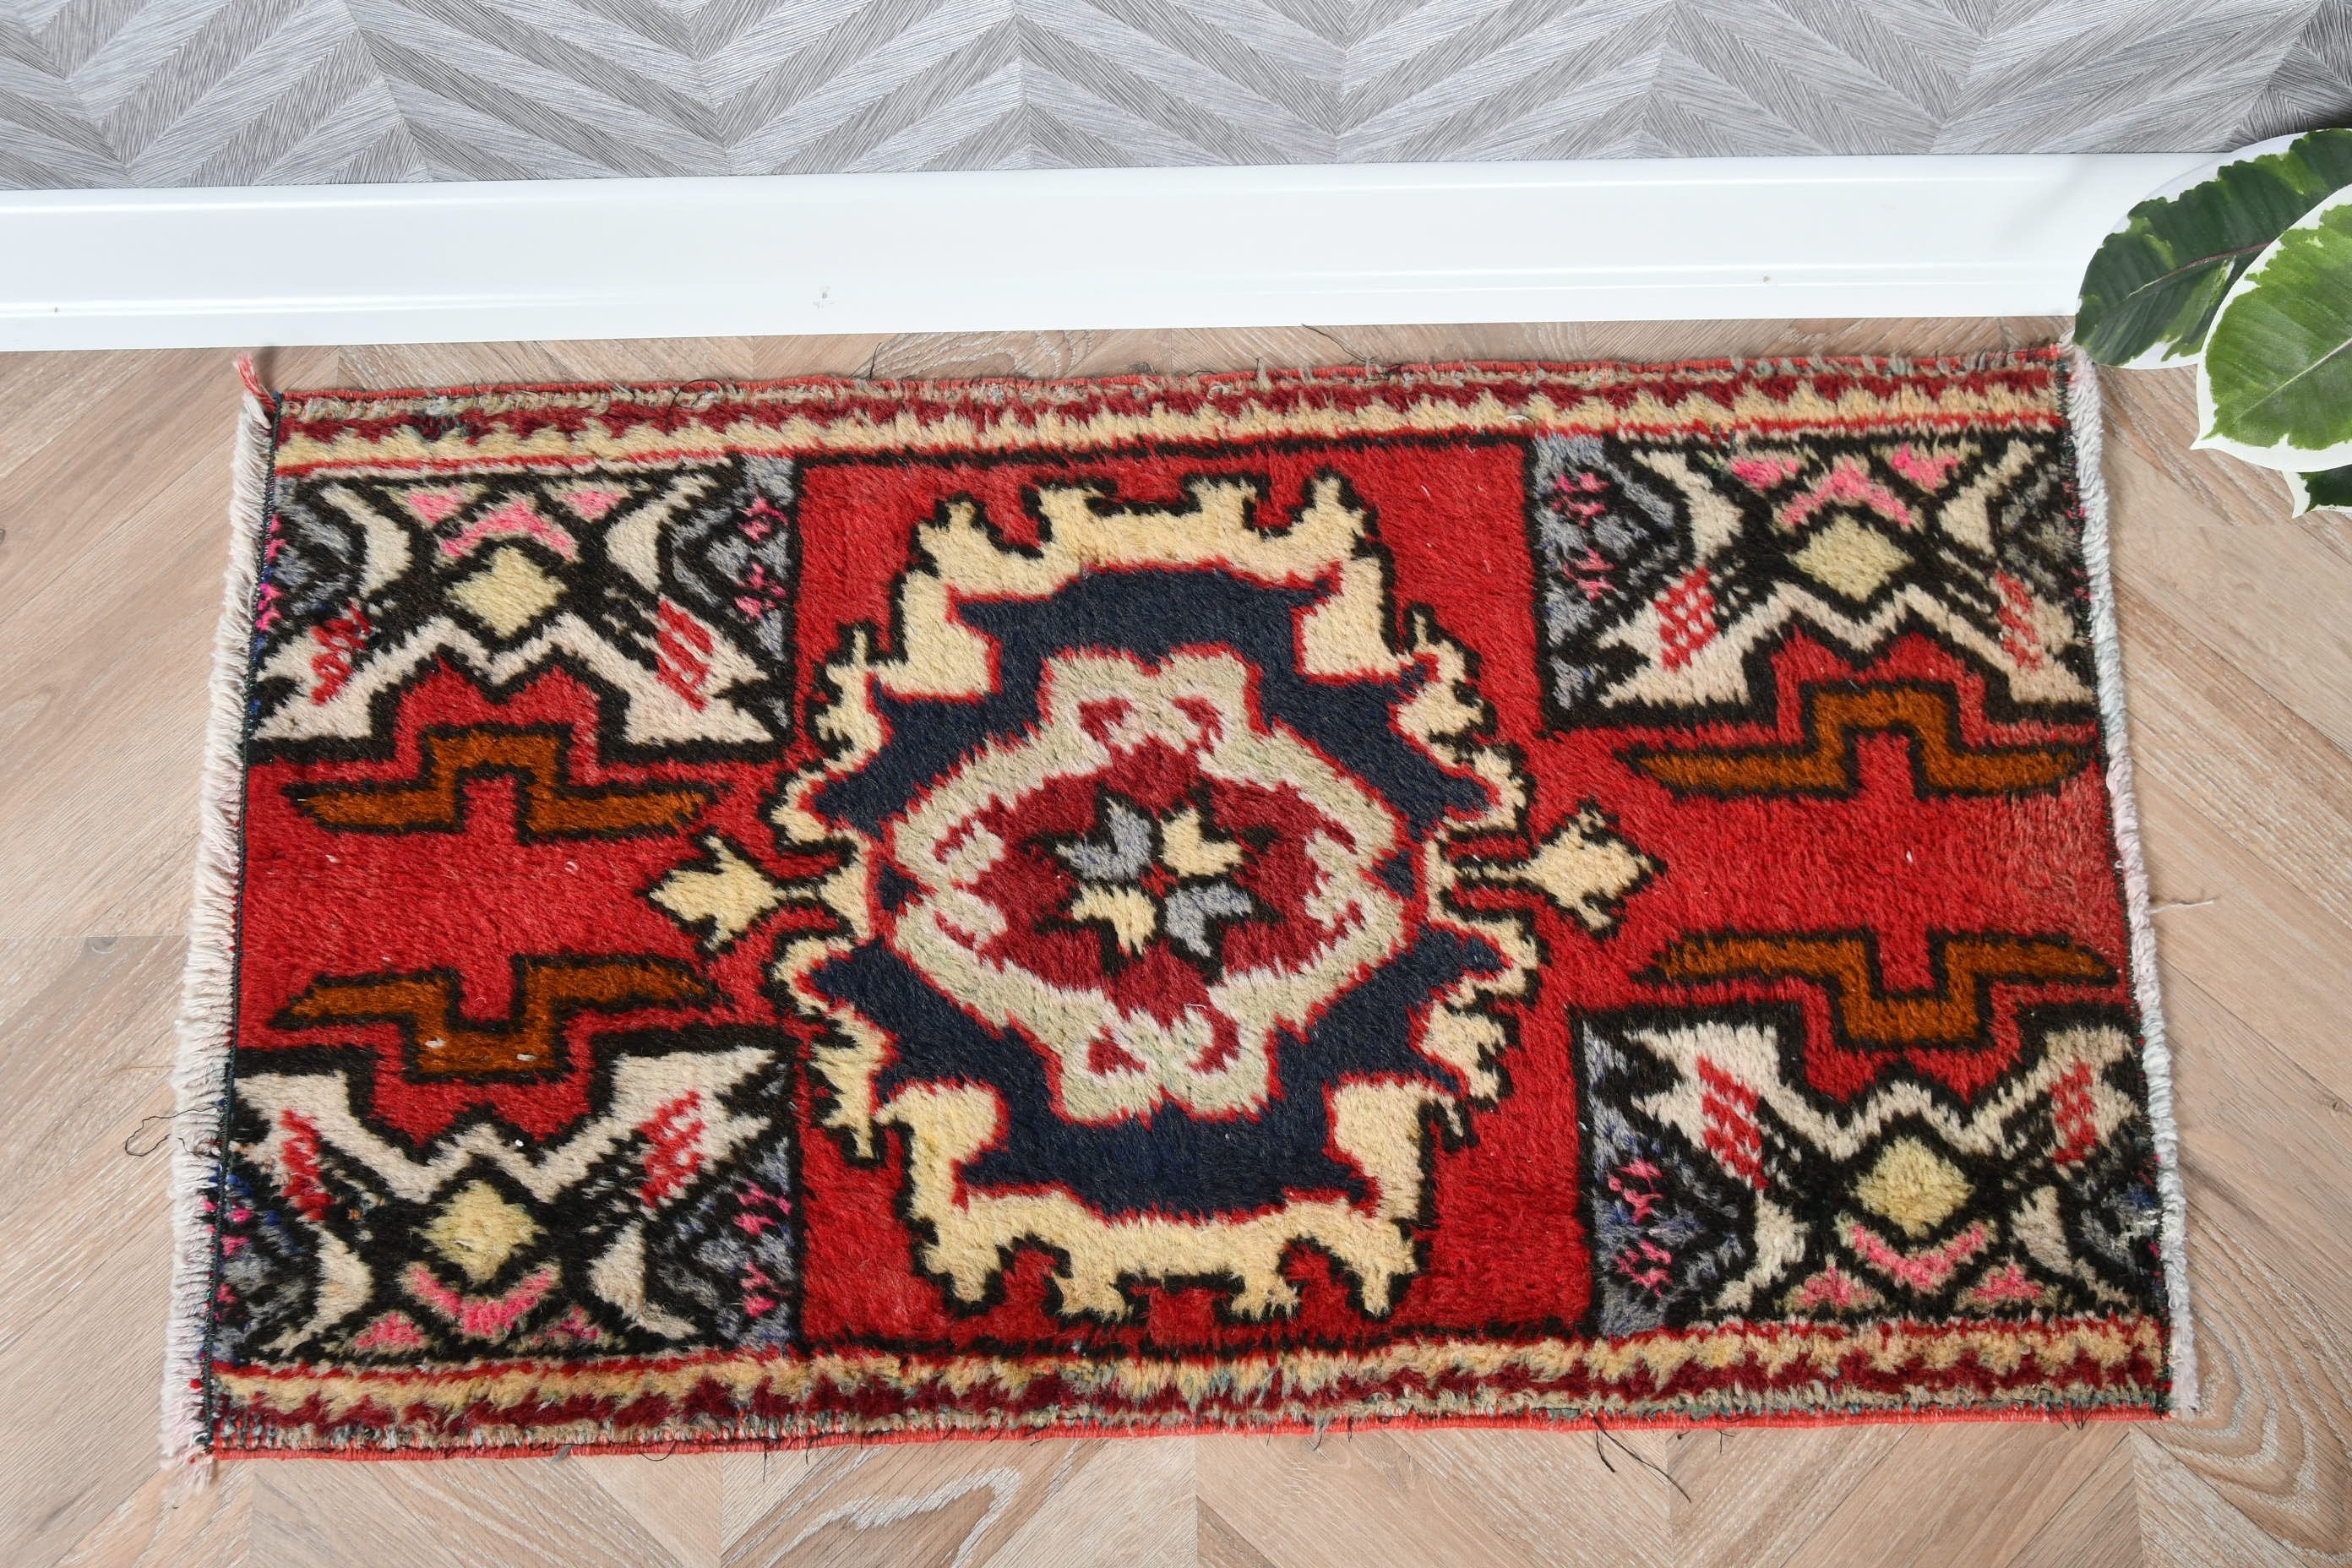 Red Antique Rug, Rugs for Bedroom, Turkish Rug, Vintage Rugs, Kitchen Rugs, Car Mat Rugs, Antique Rug, 1.5x2.7 ft Small Rugs, Floor Rugs